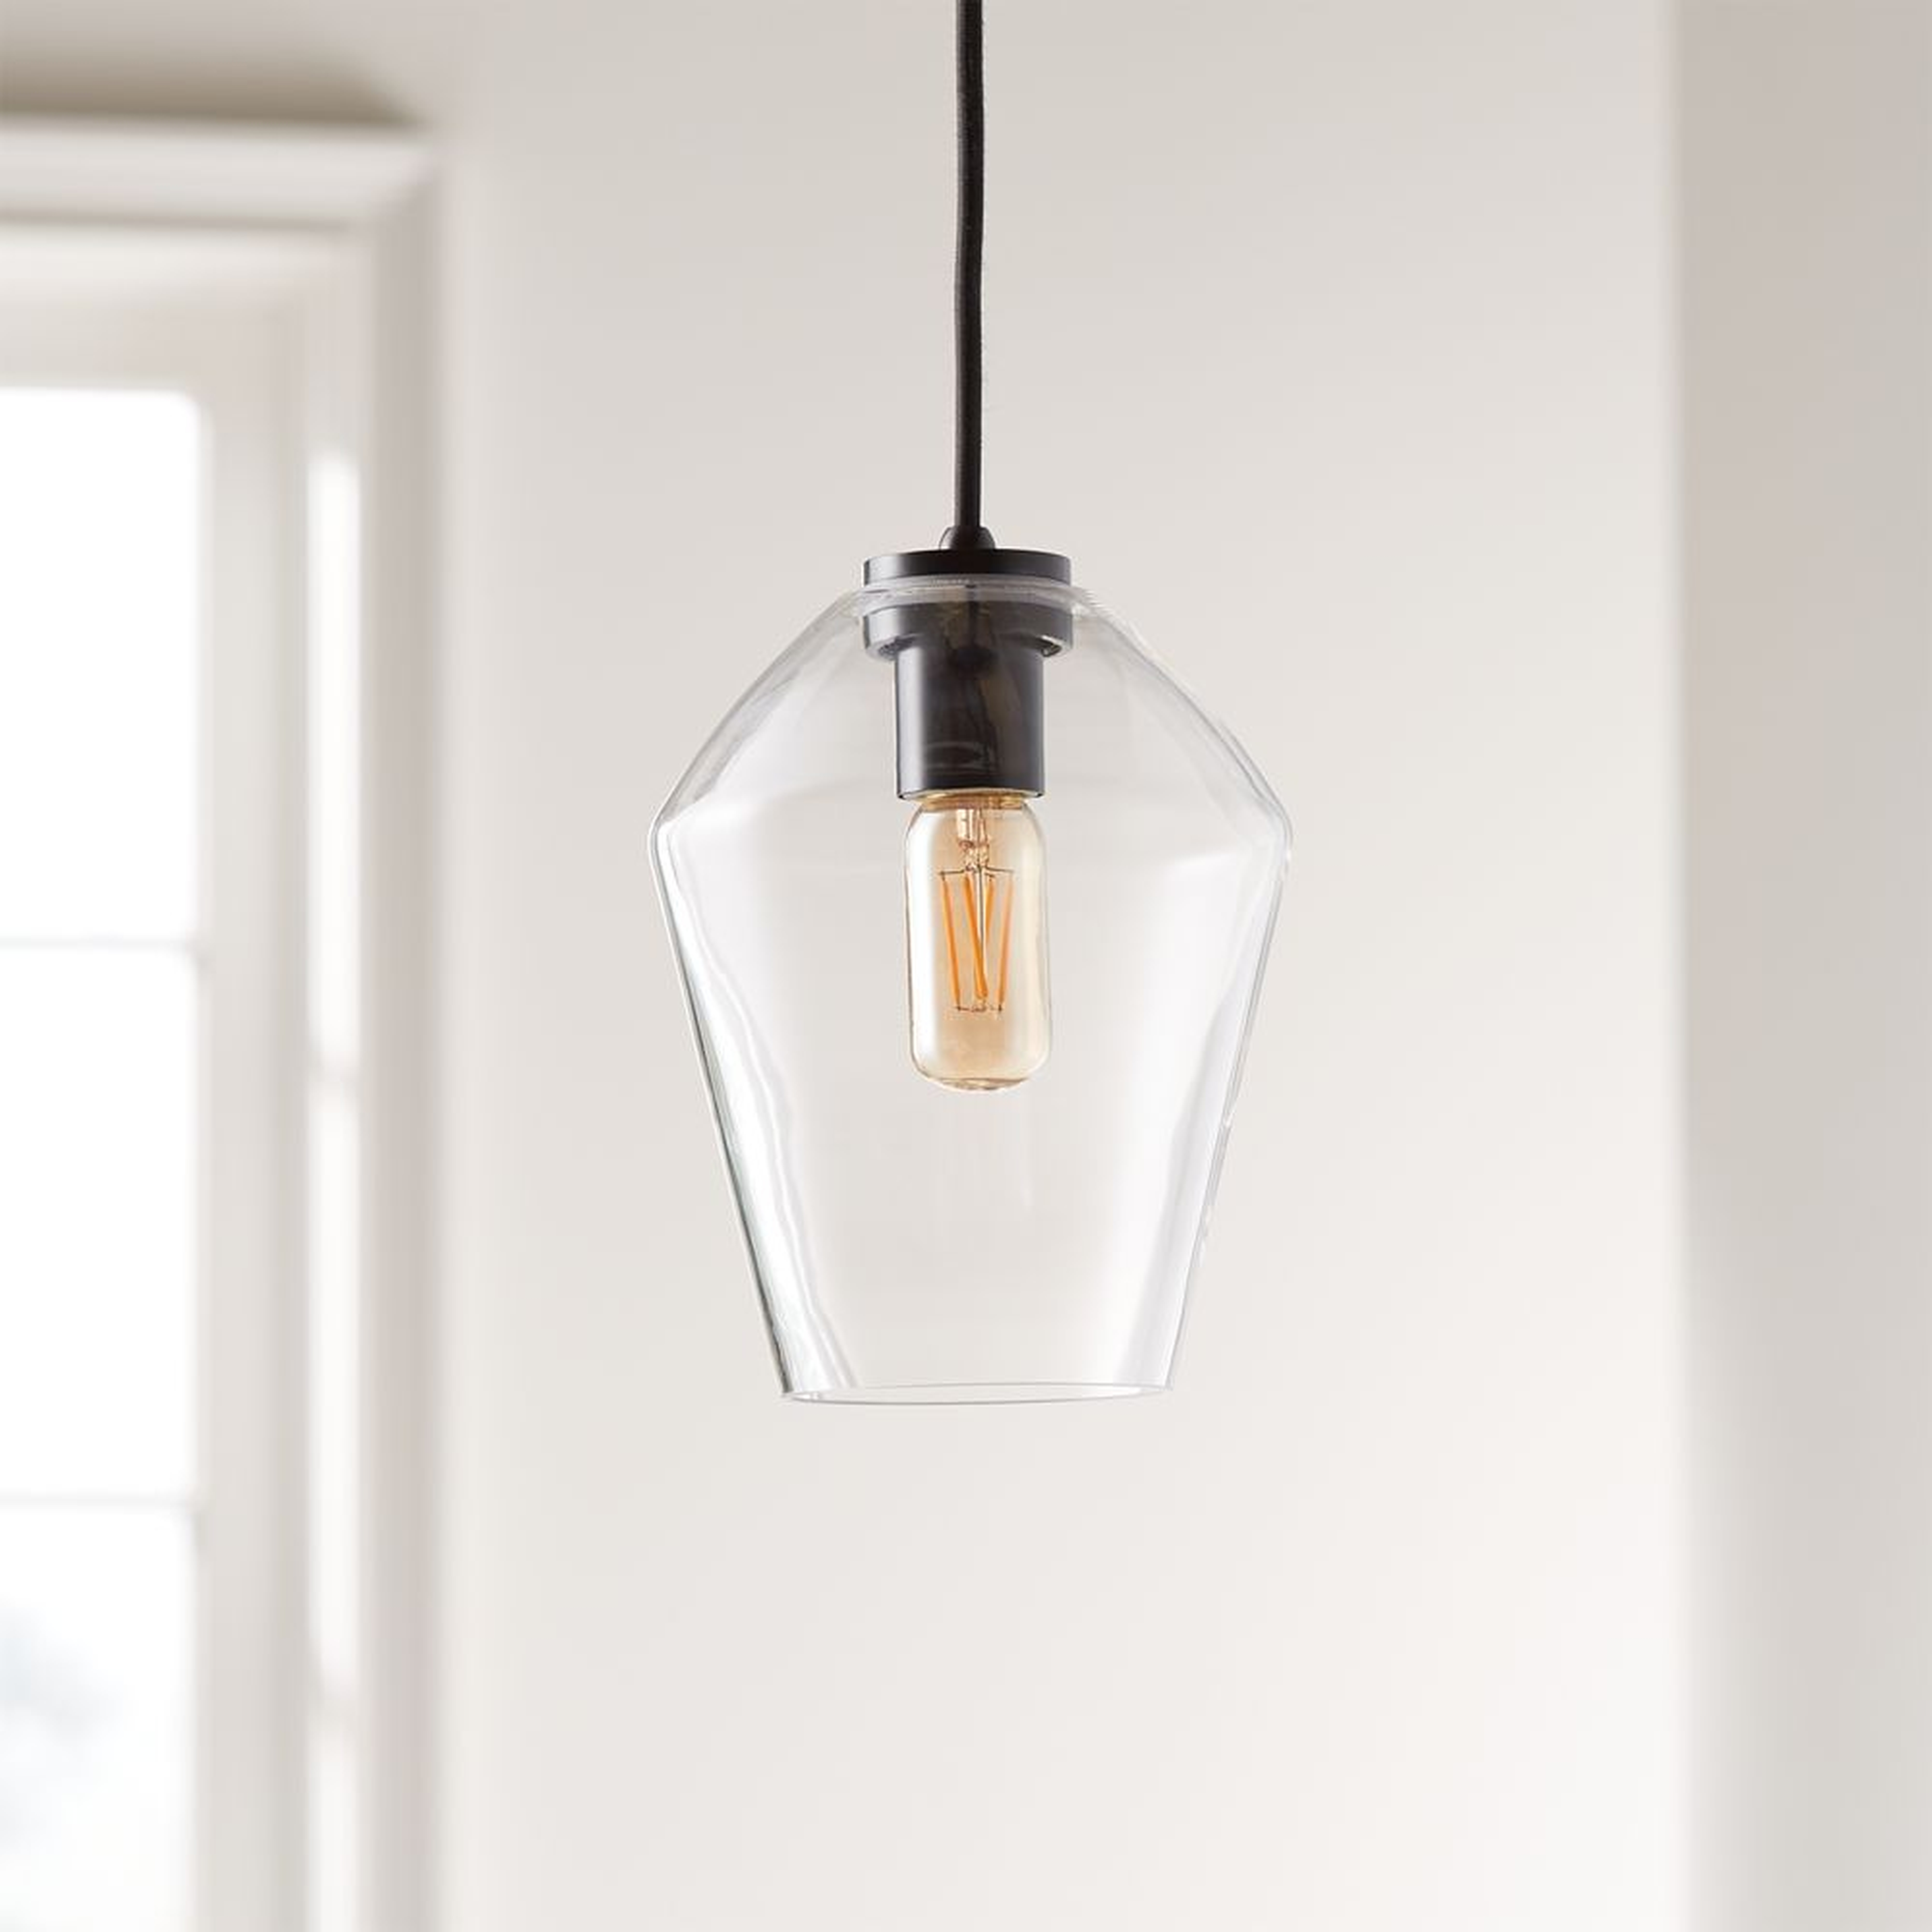 Arren Black Single Pendant Light with Clear Angled Shade - Crate and Barrel